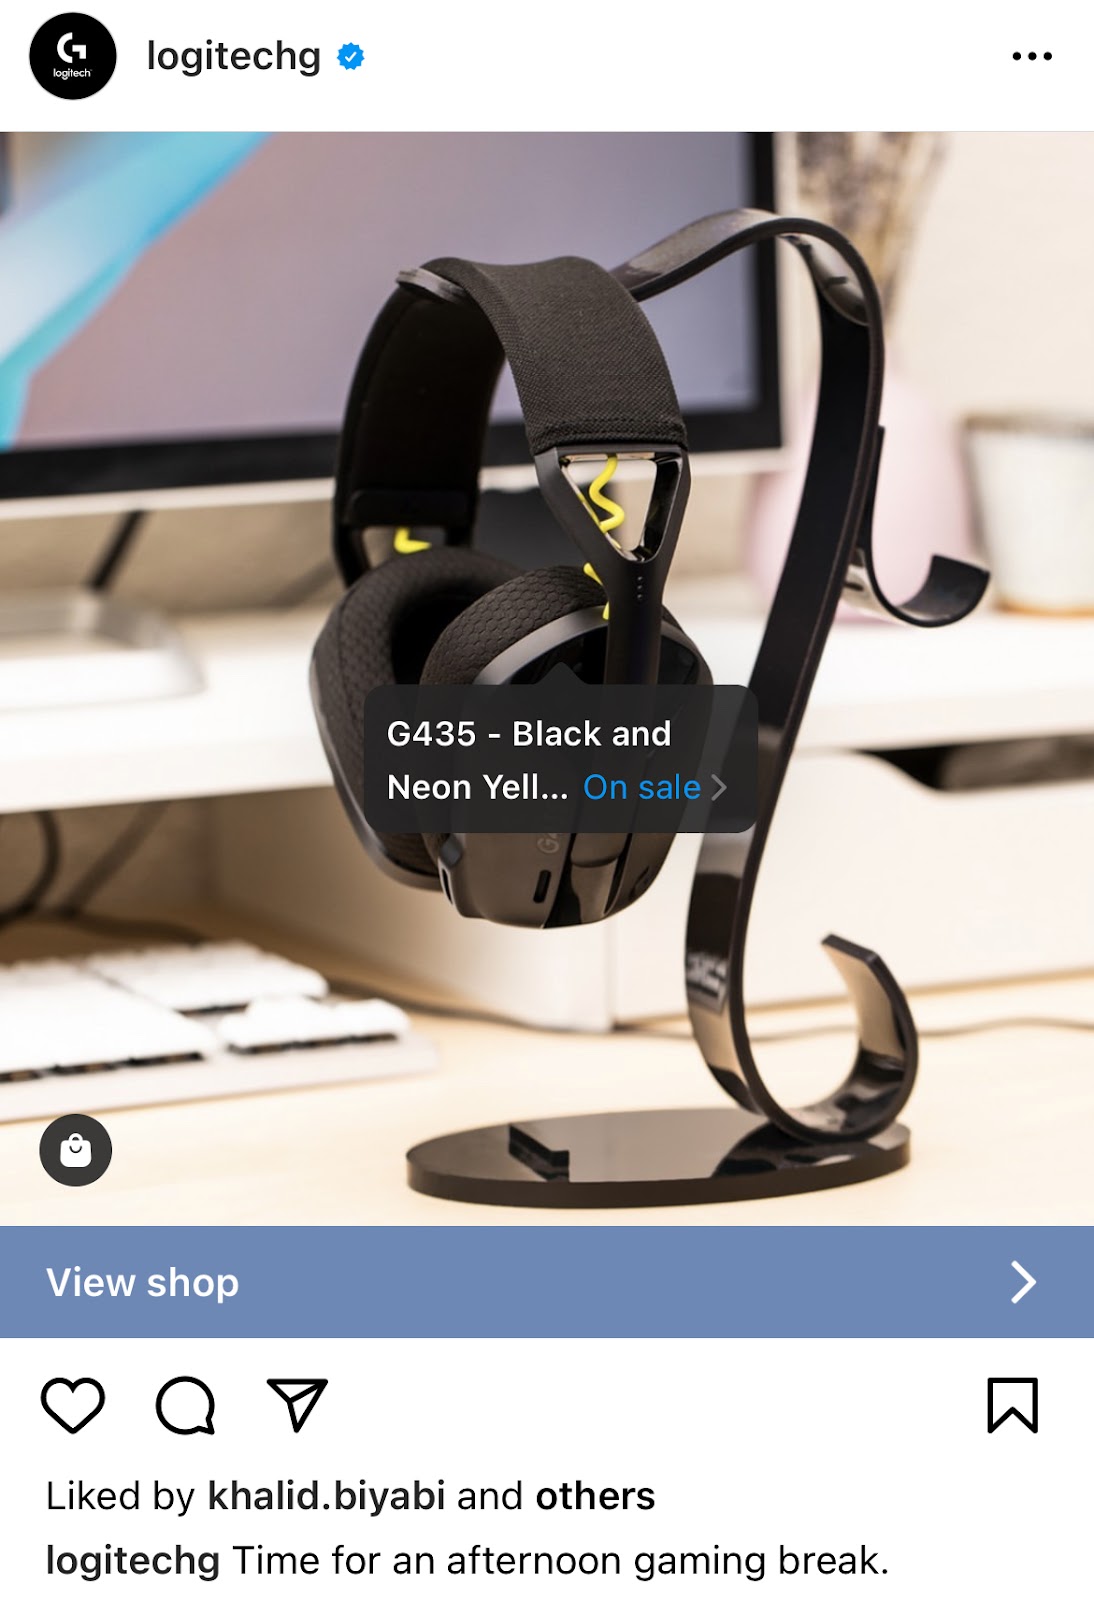 Logitech Instagram product tags